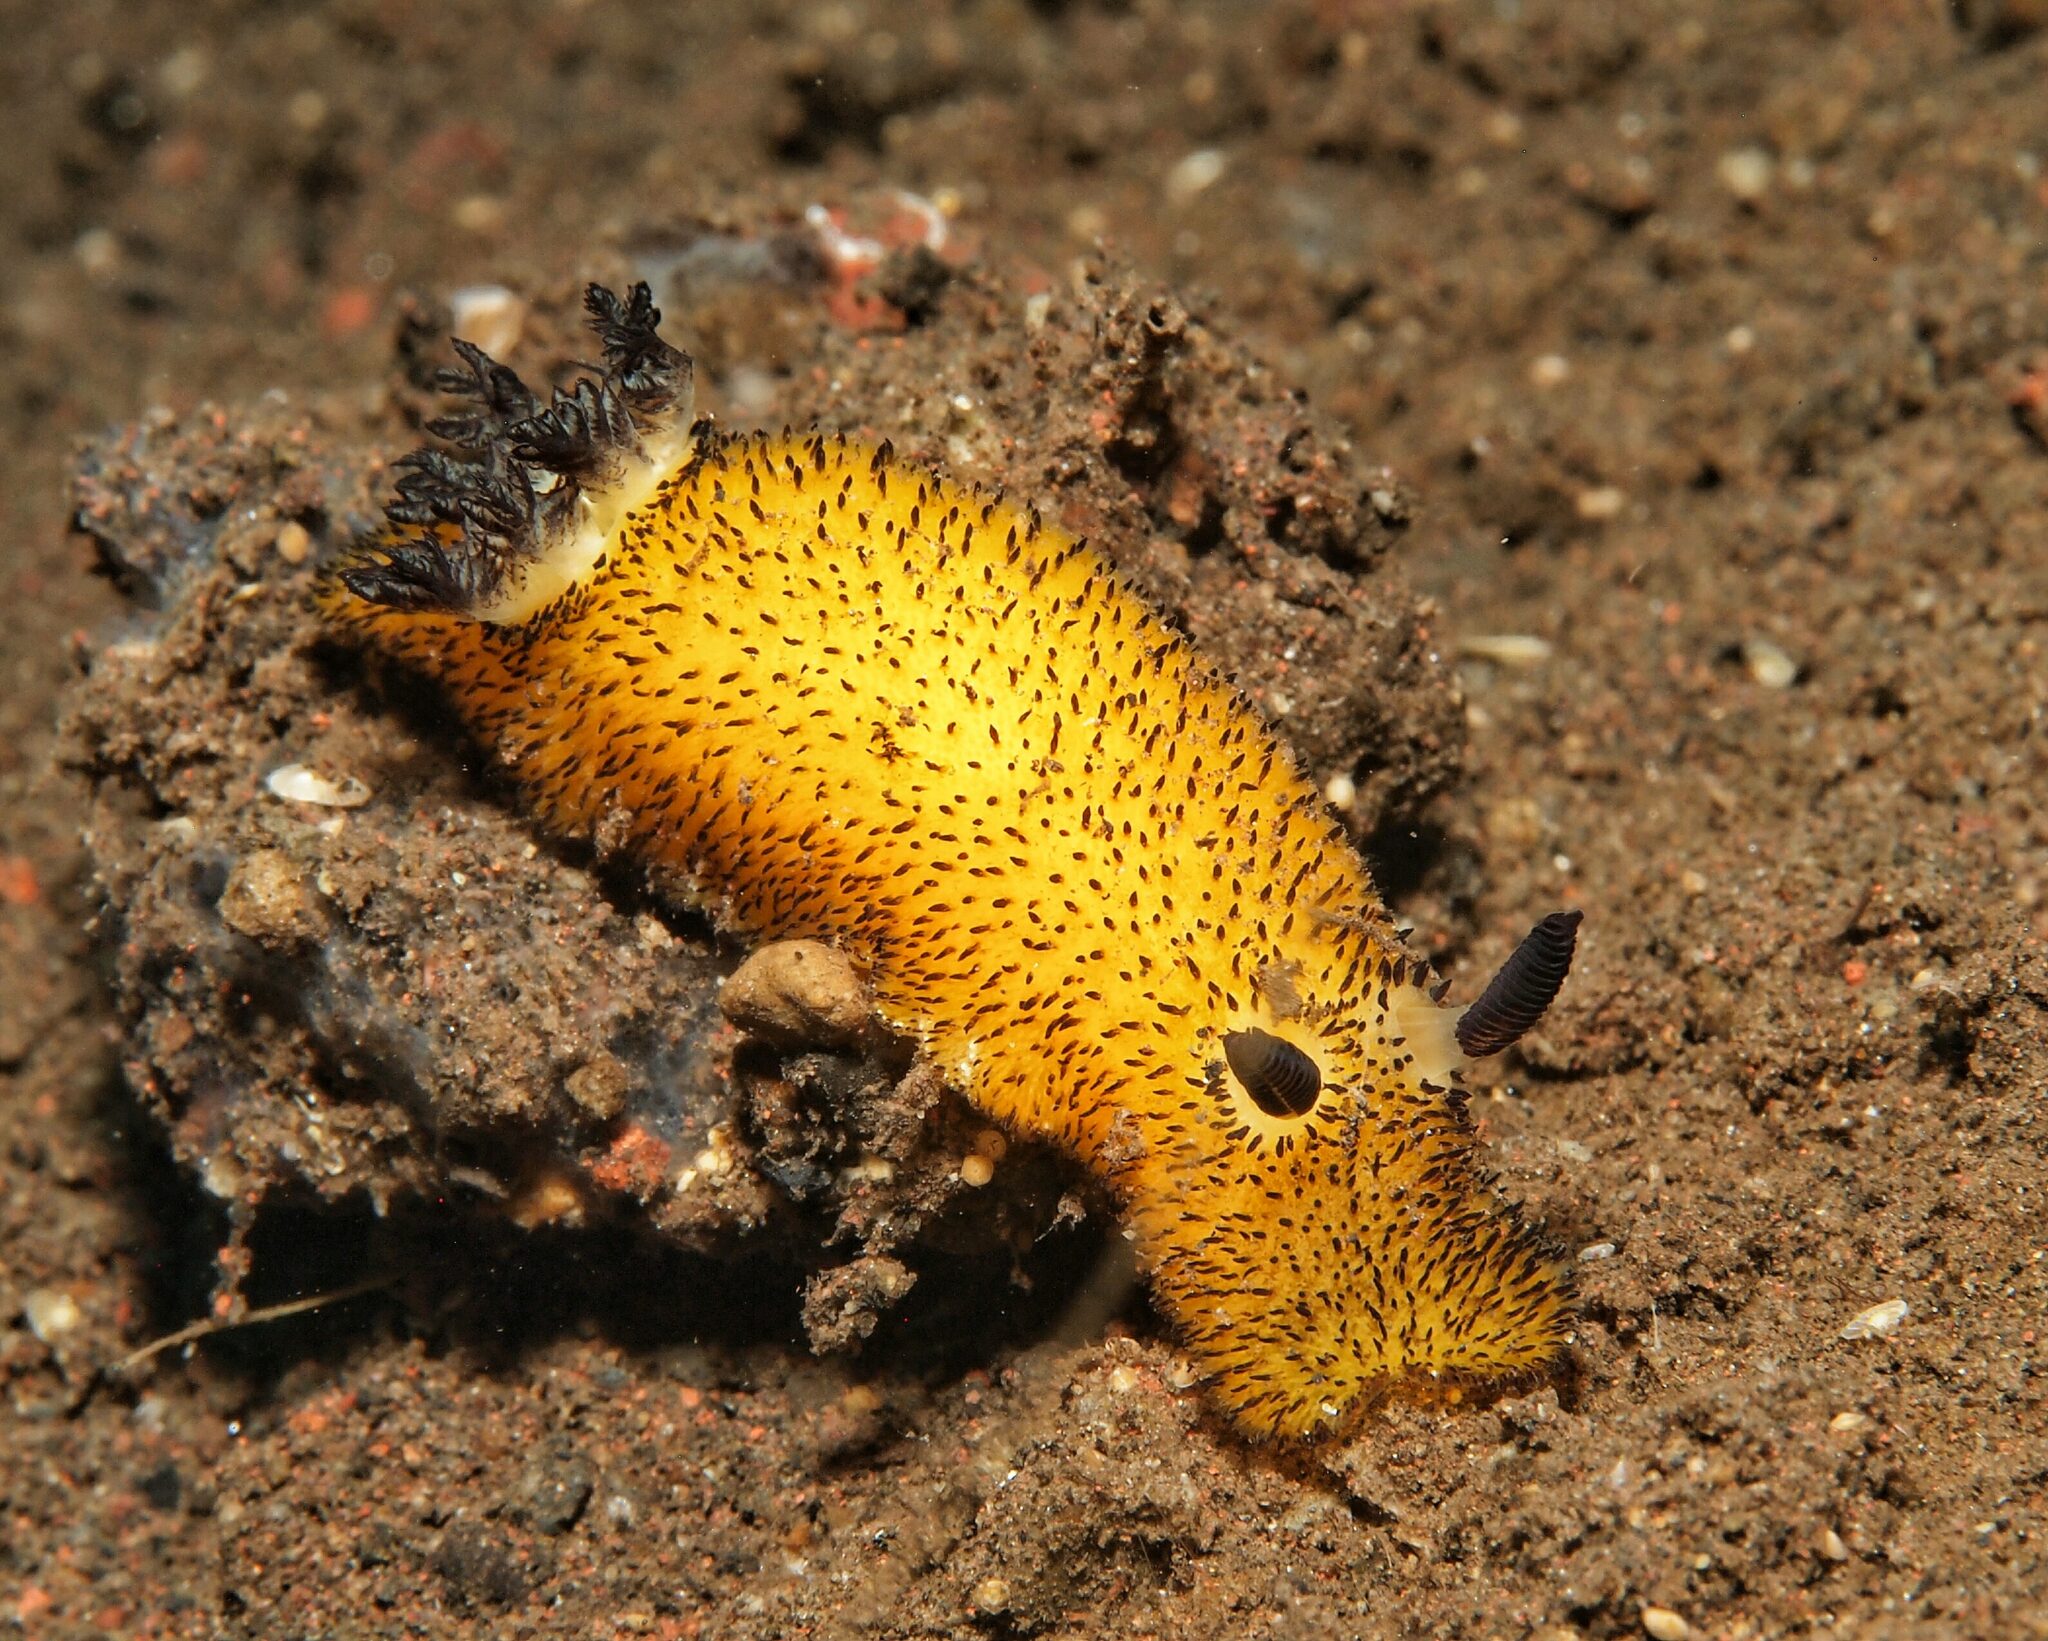 A Jorunna parva nudibranch with a dark yellow pigment, one of many sea bunny colors which they absorb from their diet